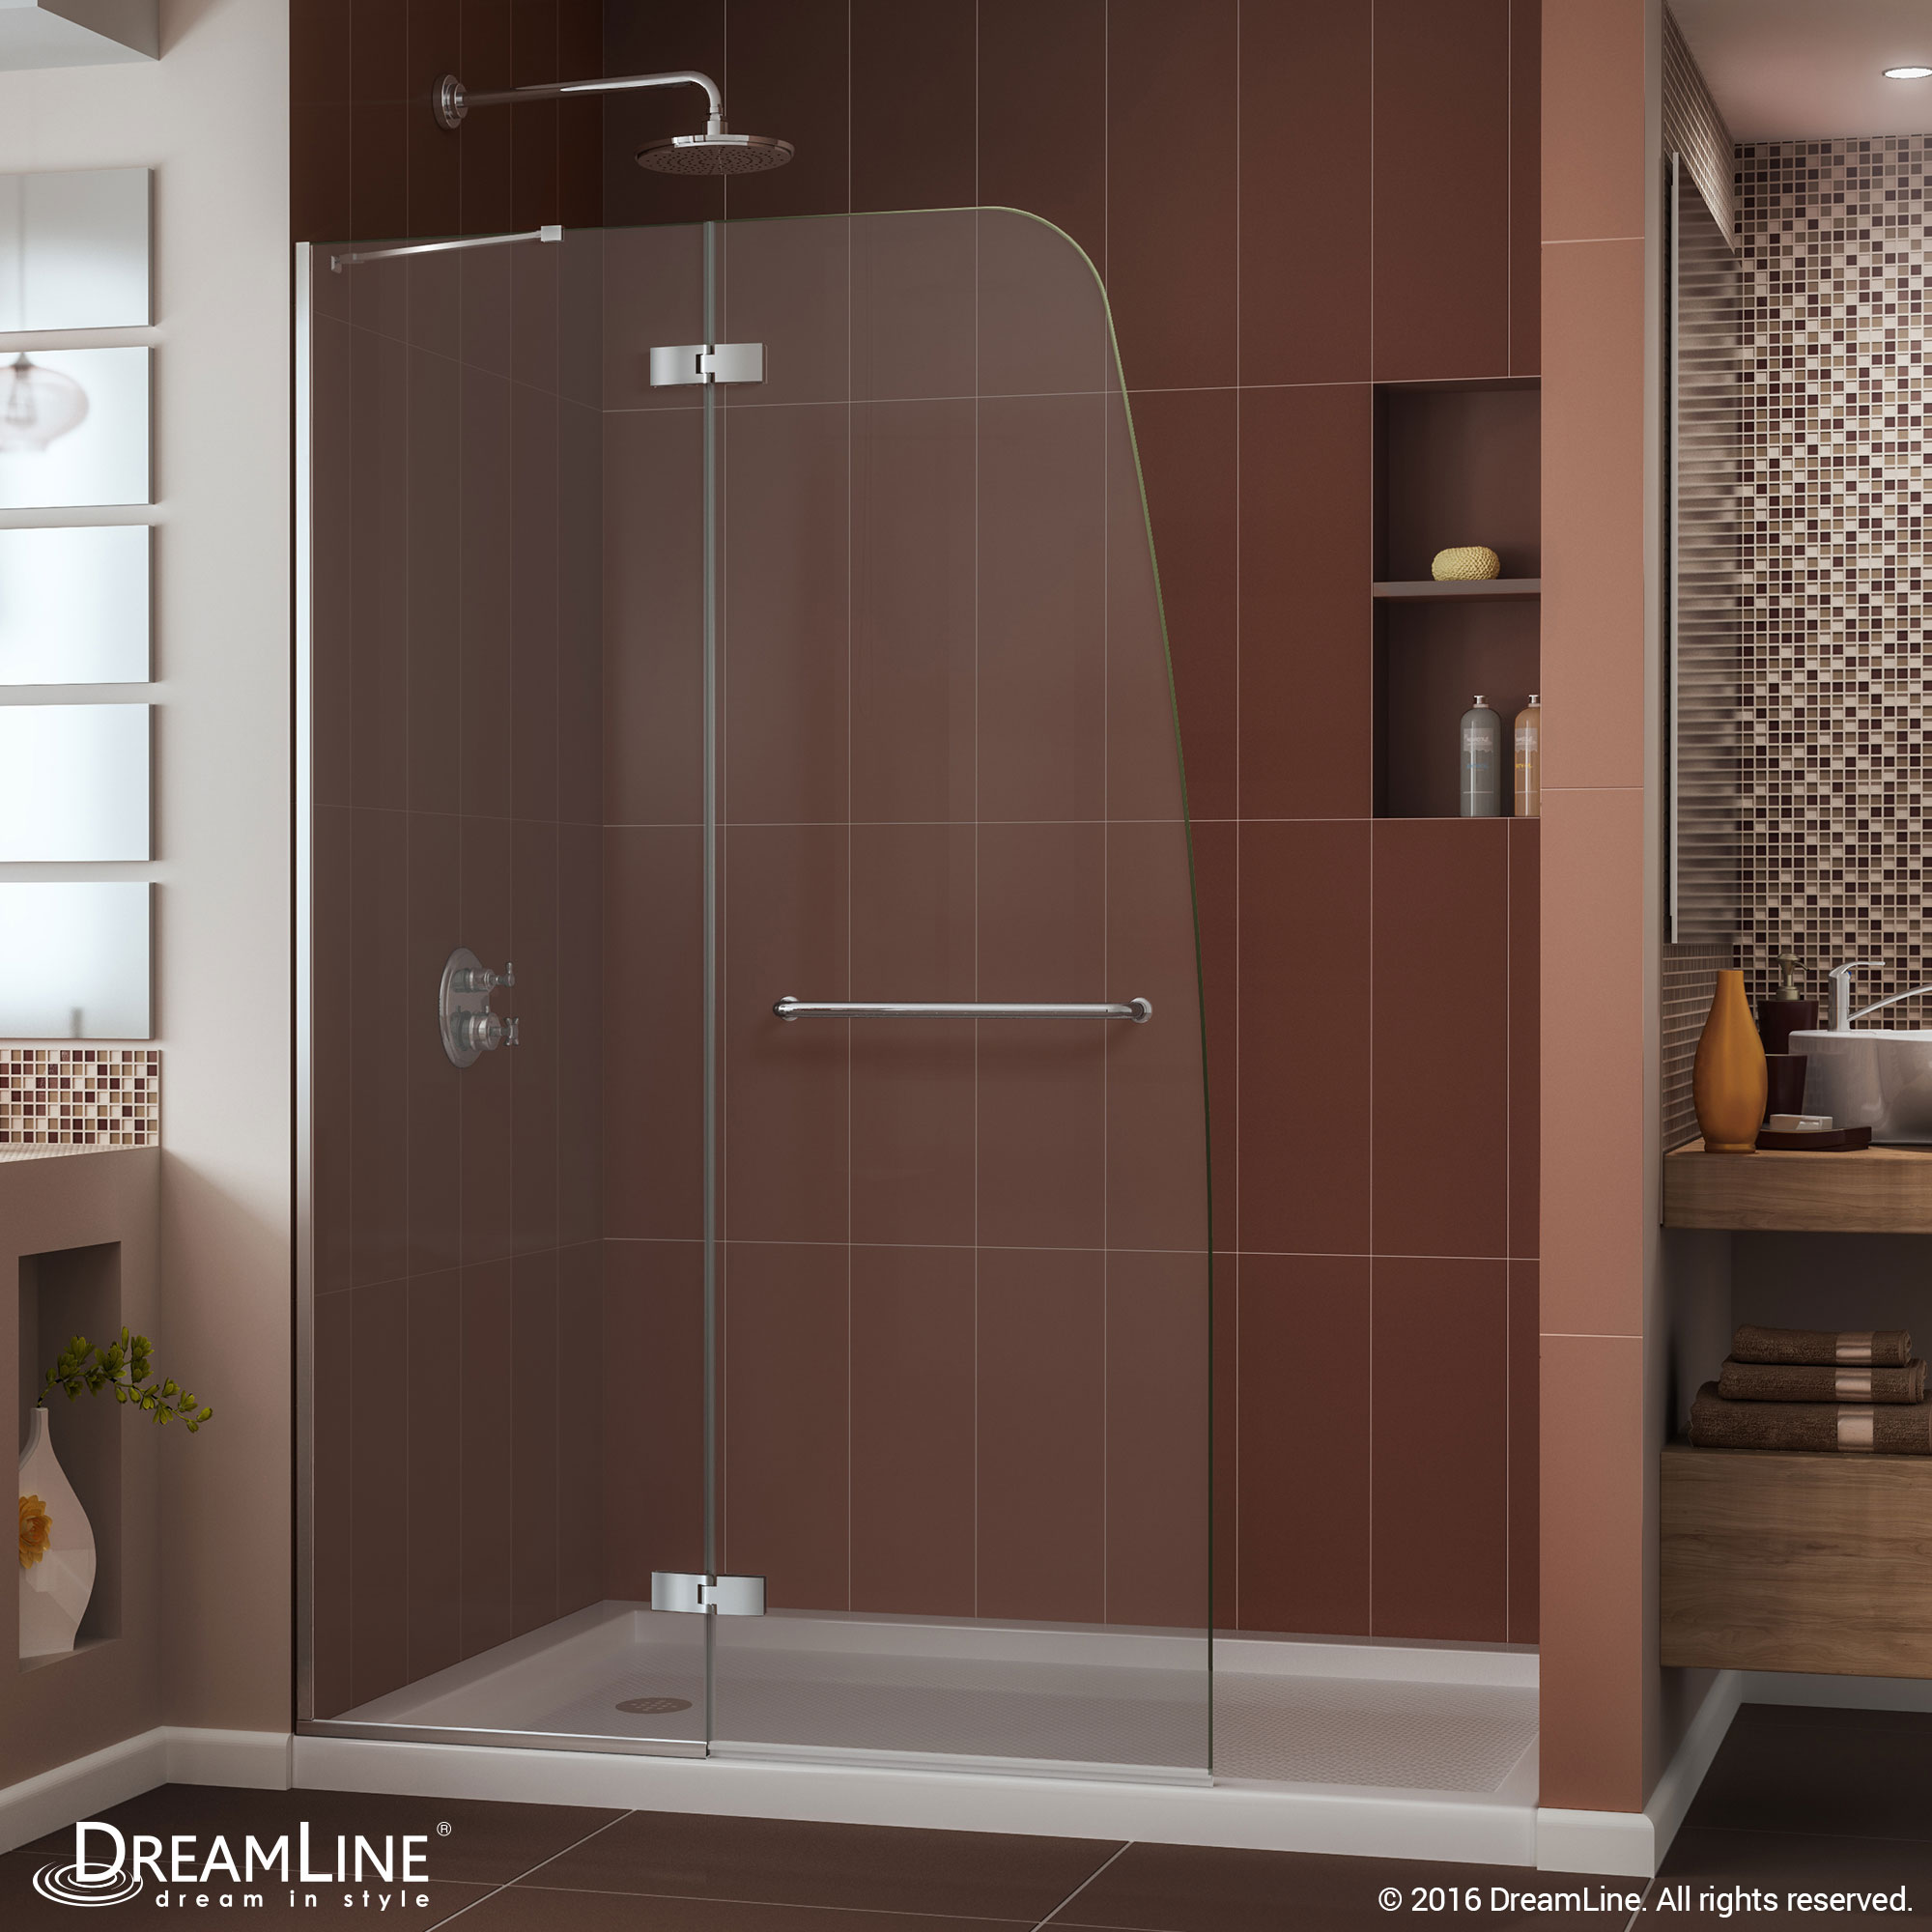 DreamLine Aqua Ultra 32 in. D x 60 in. W x 74 3/4 in. H Frameless Shower Door in Chrome and Center Drain Biscuit Base Kit